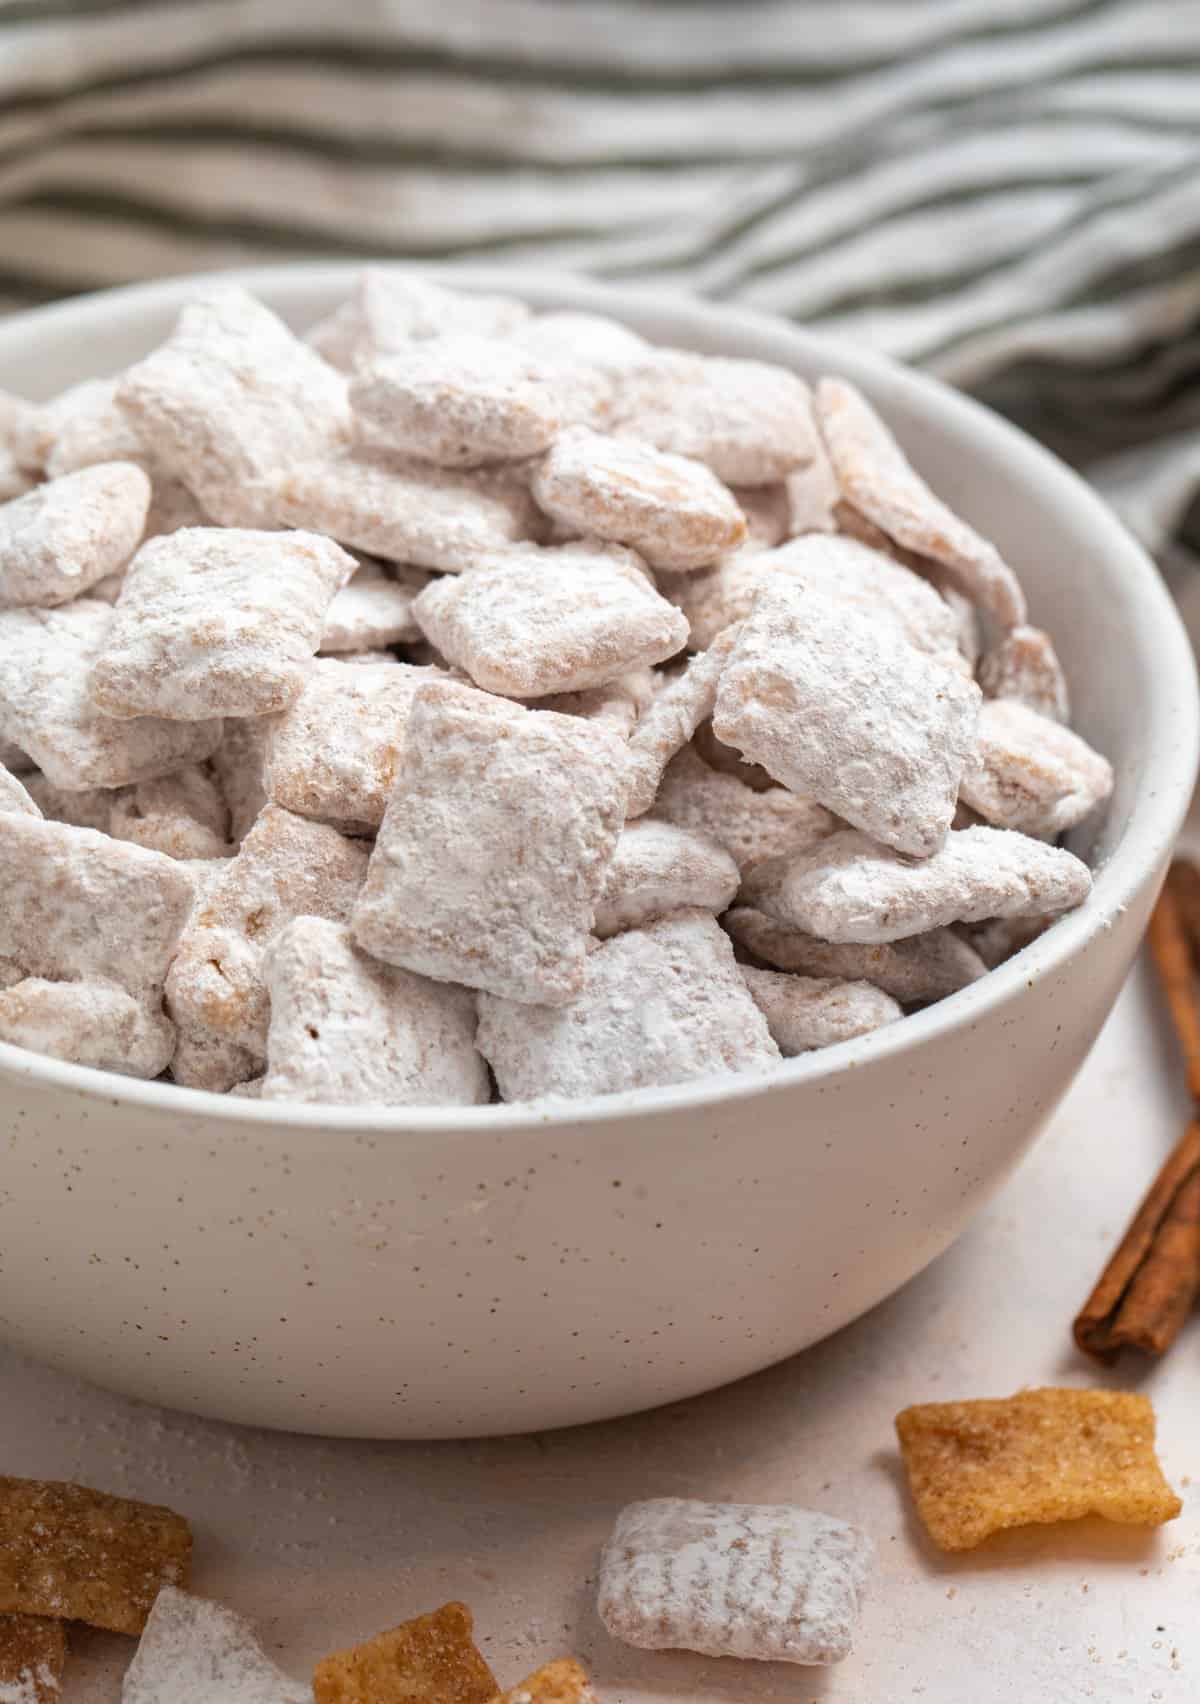 Snickerdoodle puppy chow in bowl with cinnamon stick and cereal beside it.